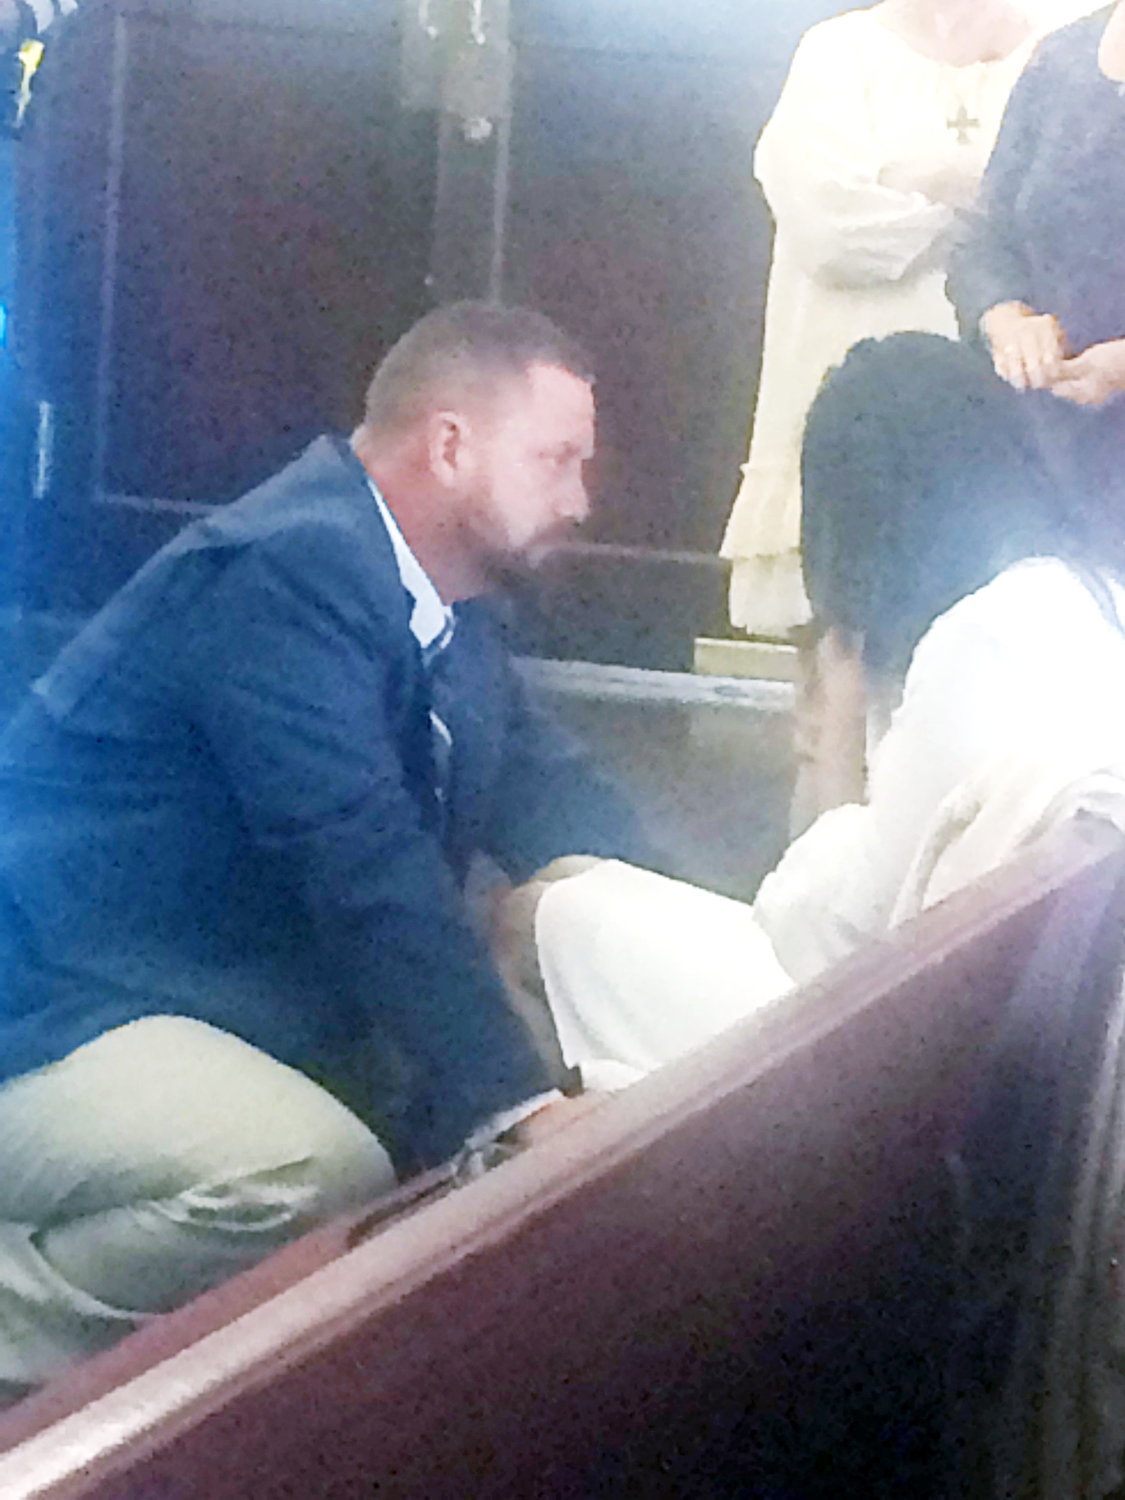 David McGee comforts his wife, Maya, after the jury found him guilty and before the punishment phase began during a recess during the trial.